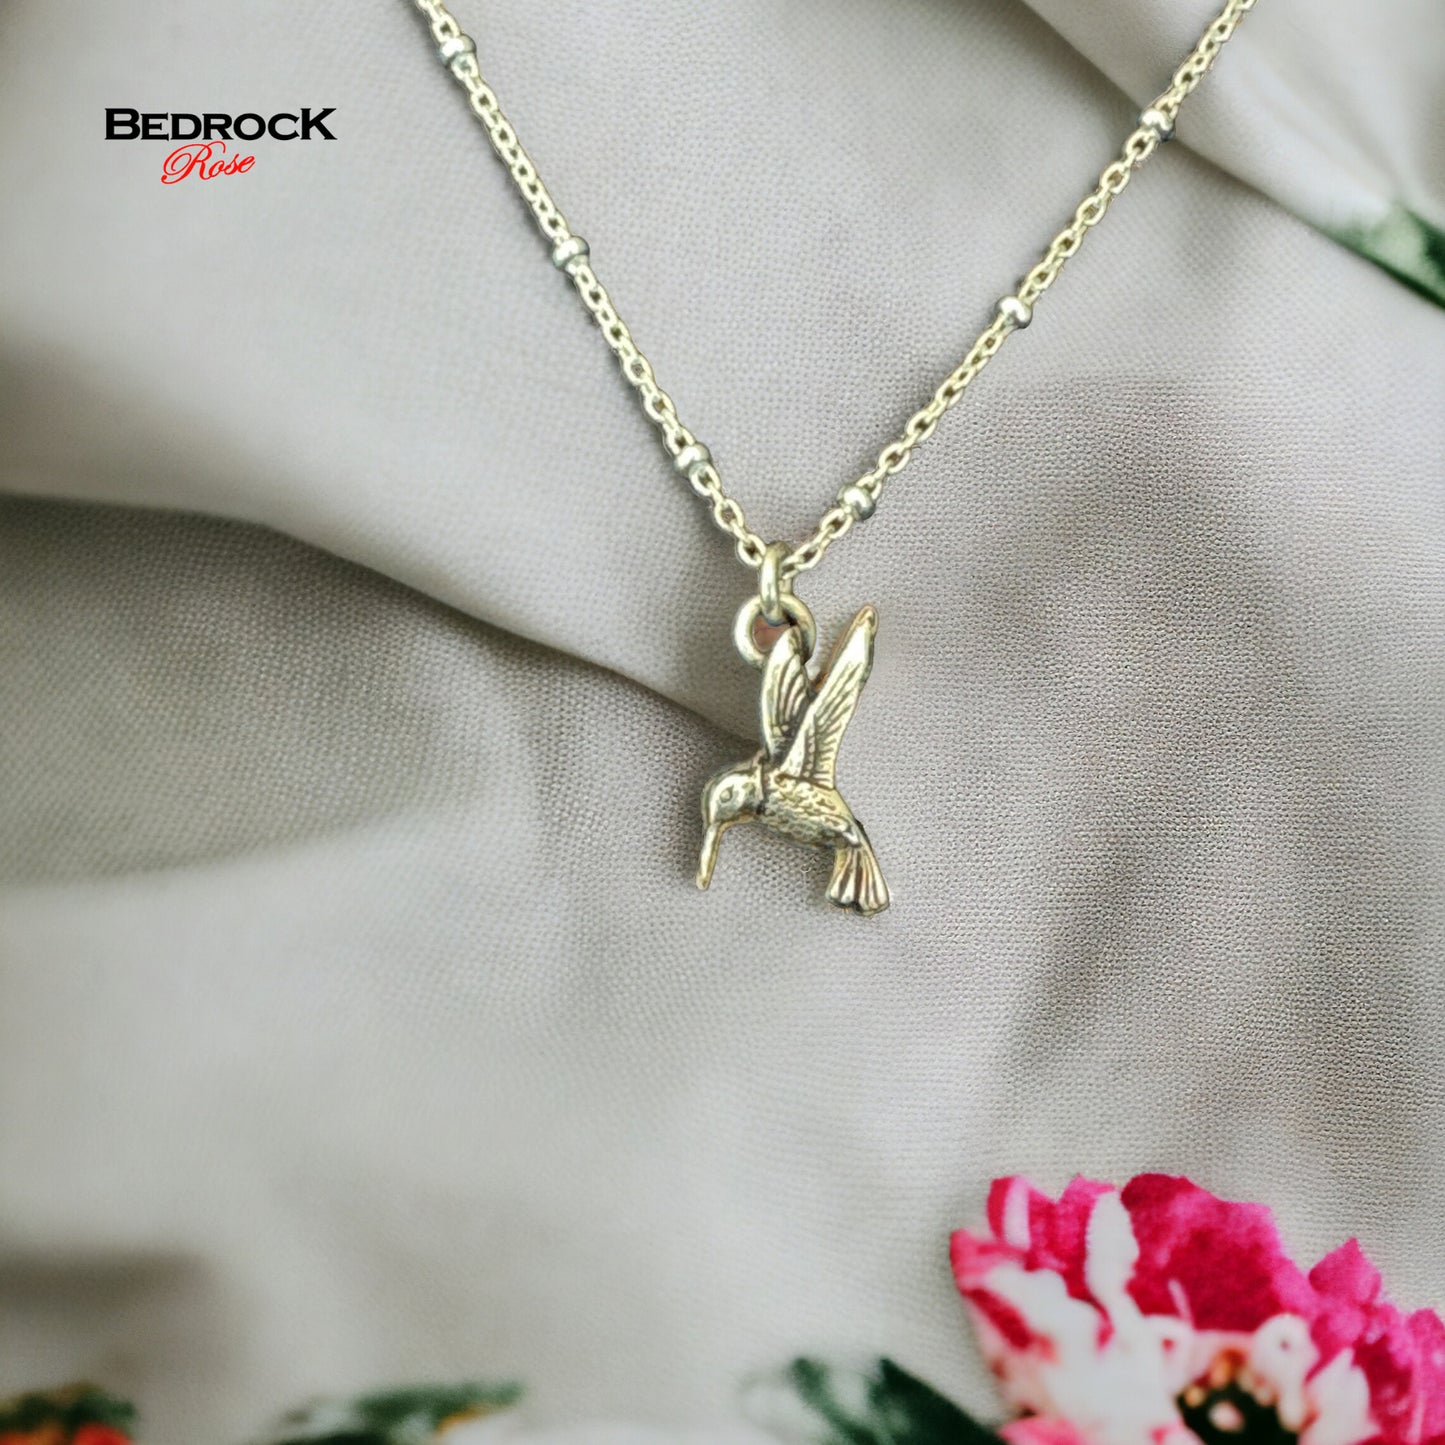 Tiny Fine silver hummingbird necklace on sterling silver satellite chain, nature-inspired jewelry, layering necklace, gift for her